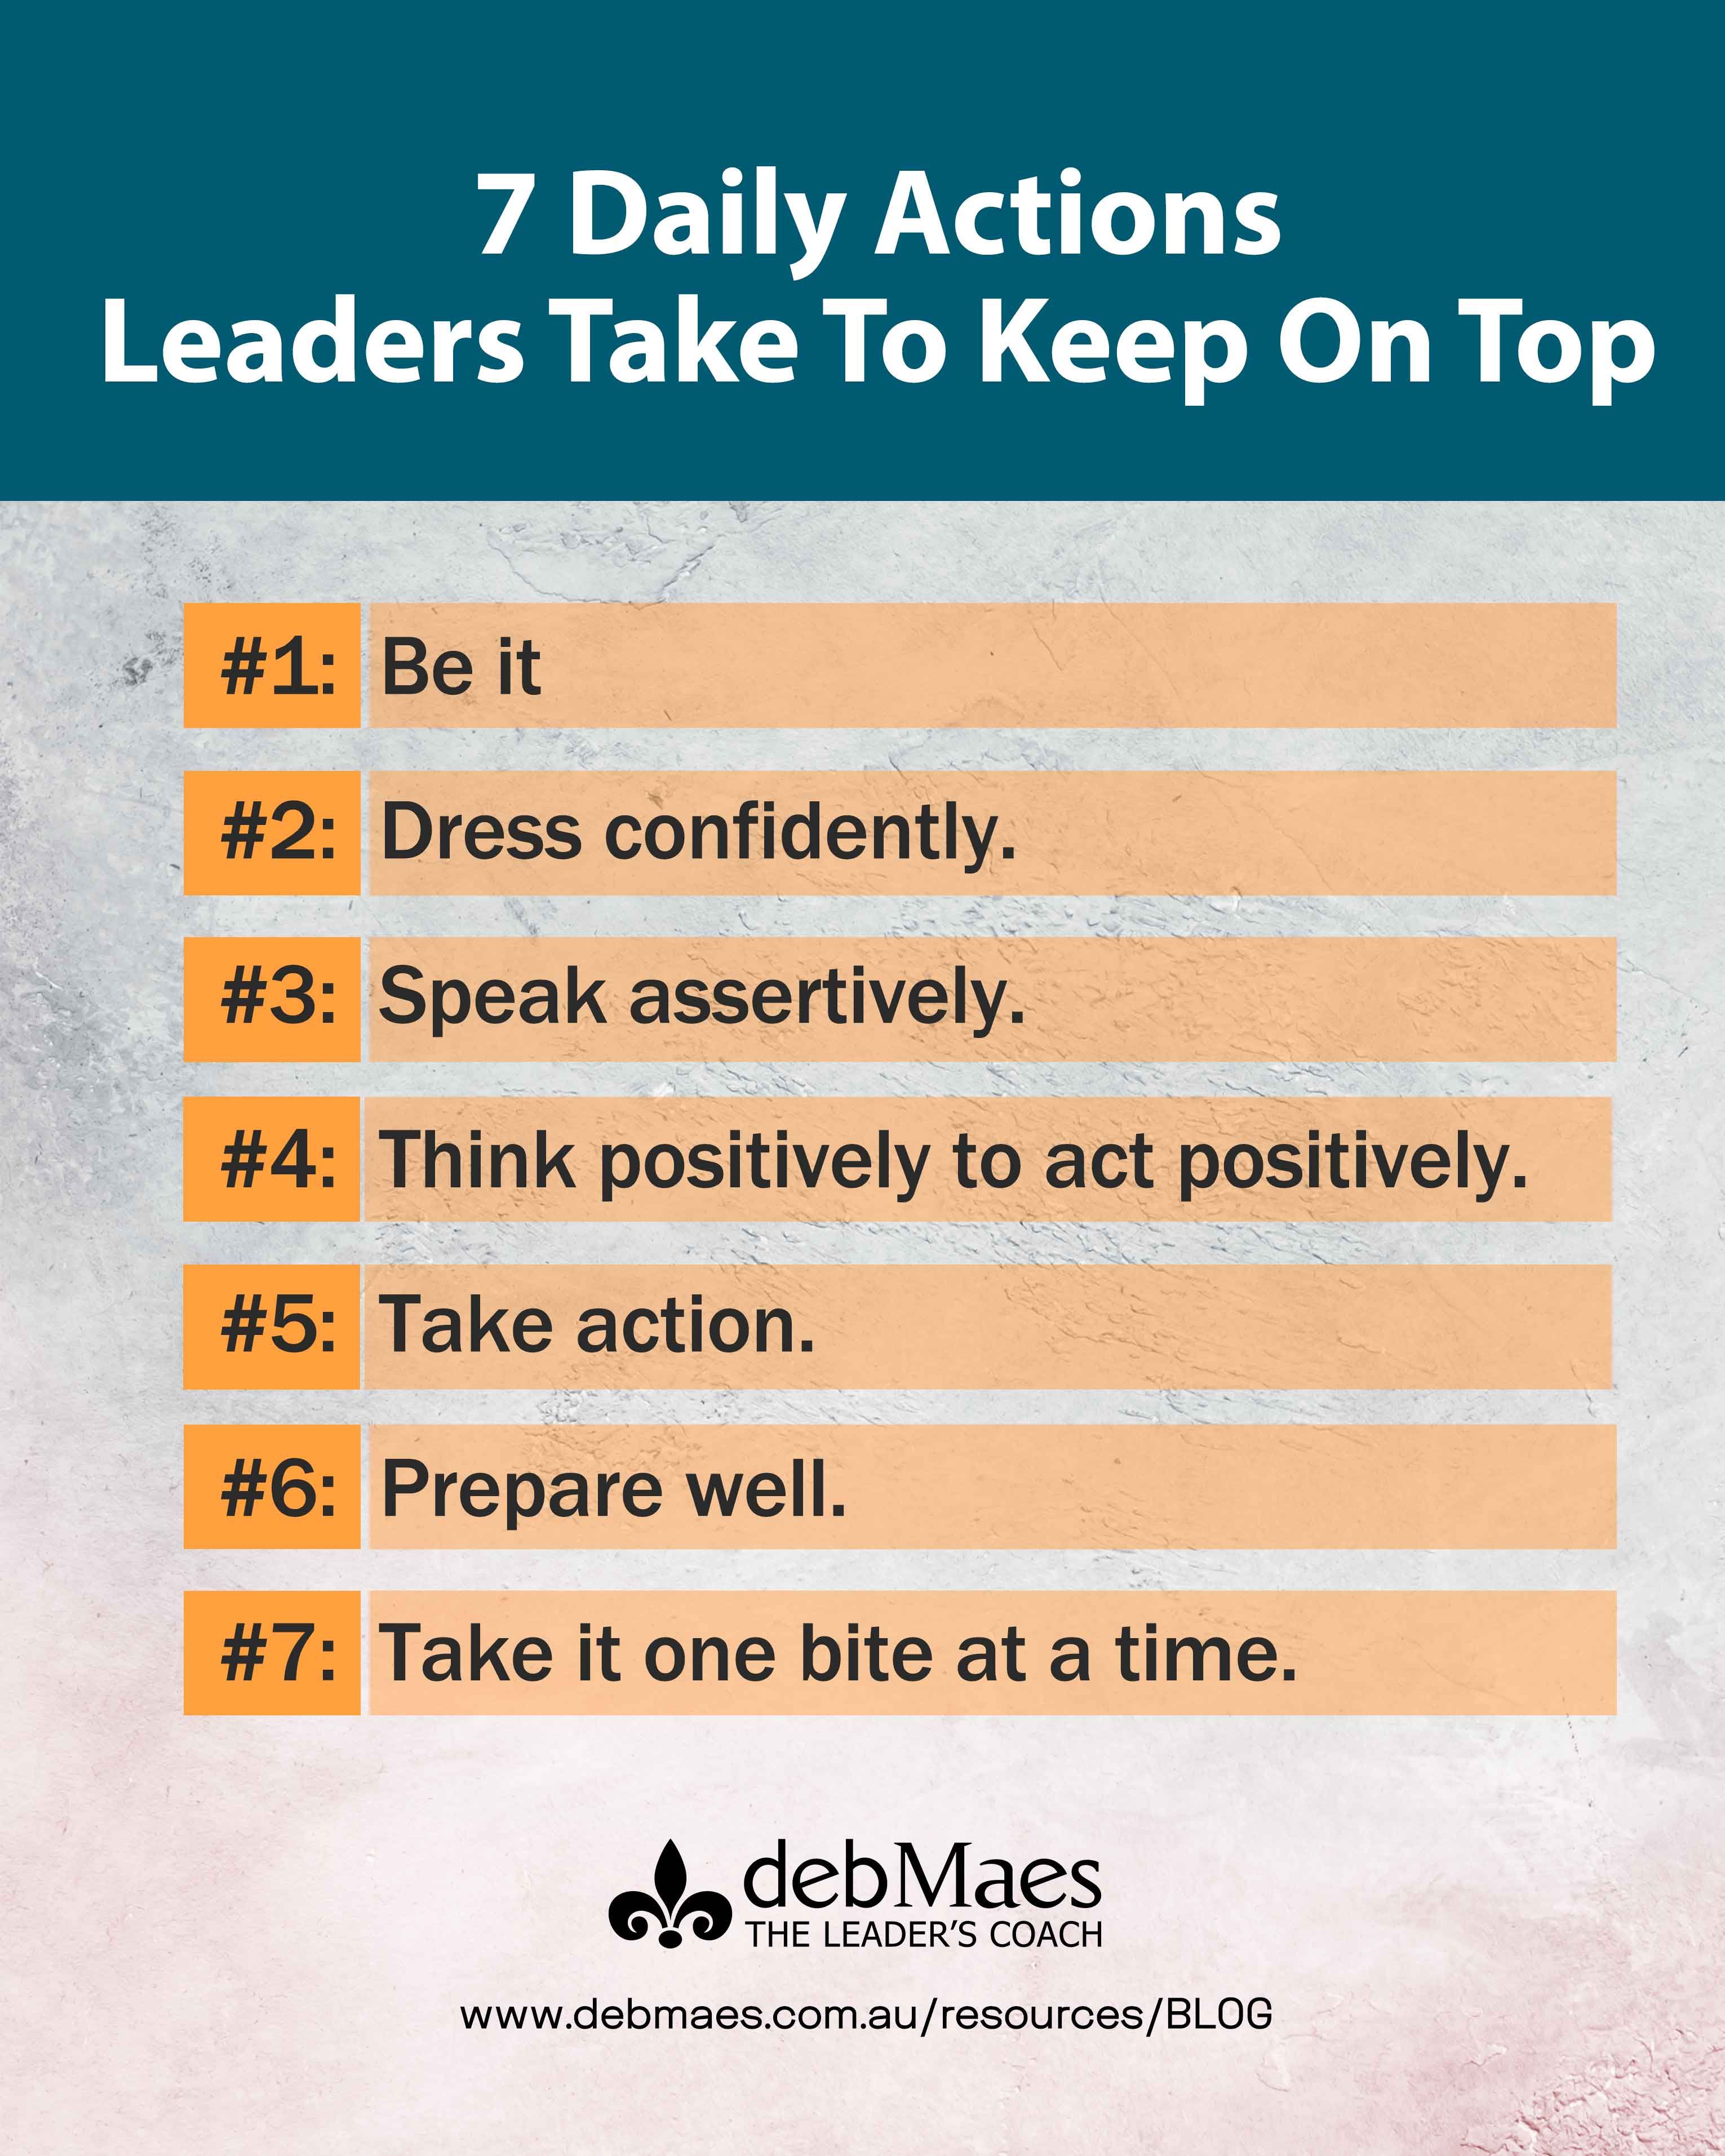 seven daily actions leader take to keep on top